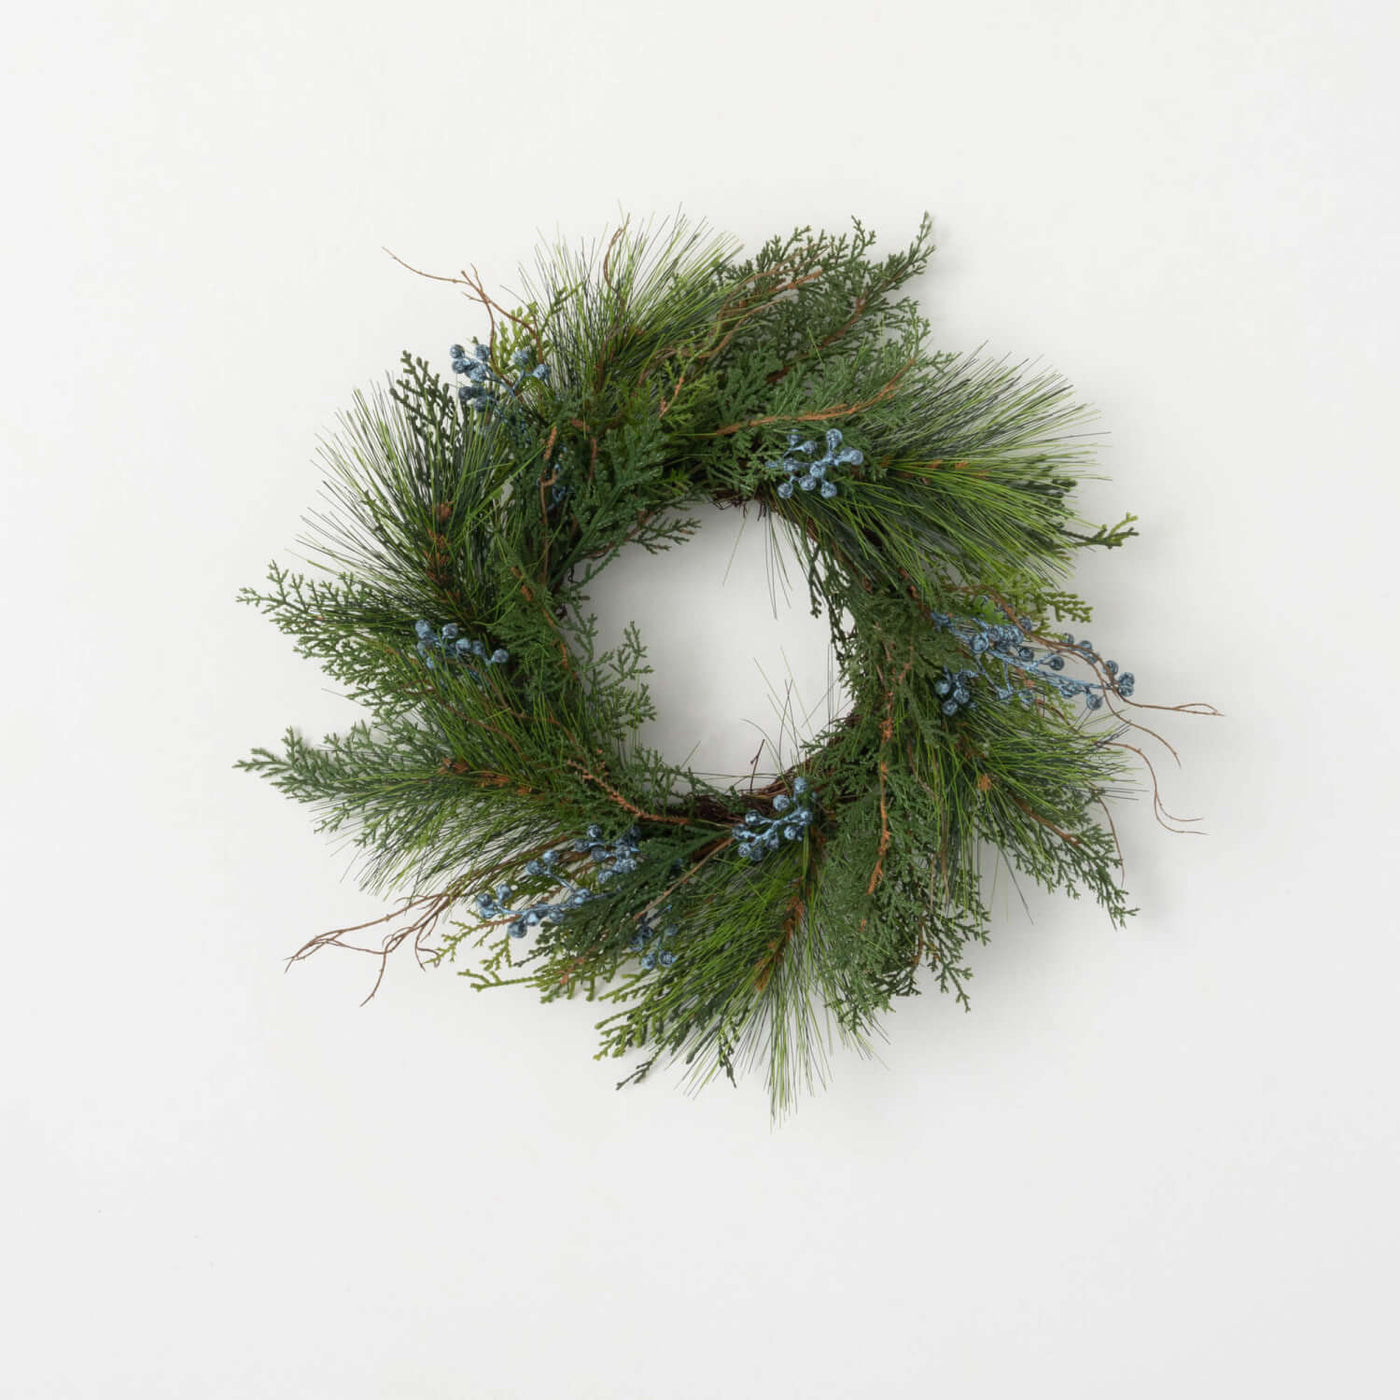 Juniper Holiday Wreath with blue berry and twig accents